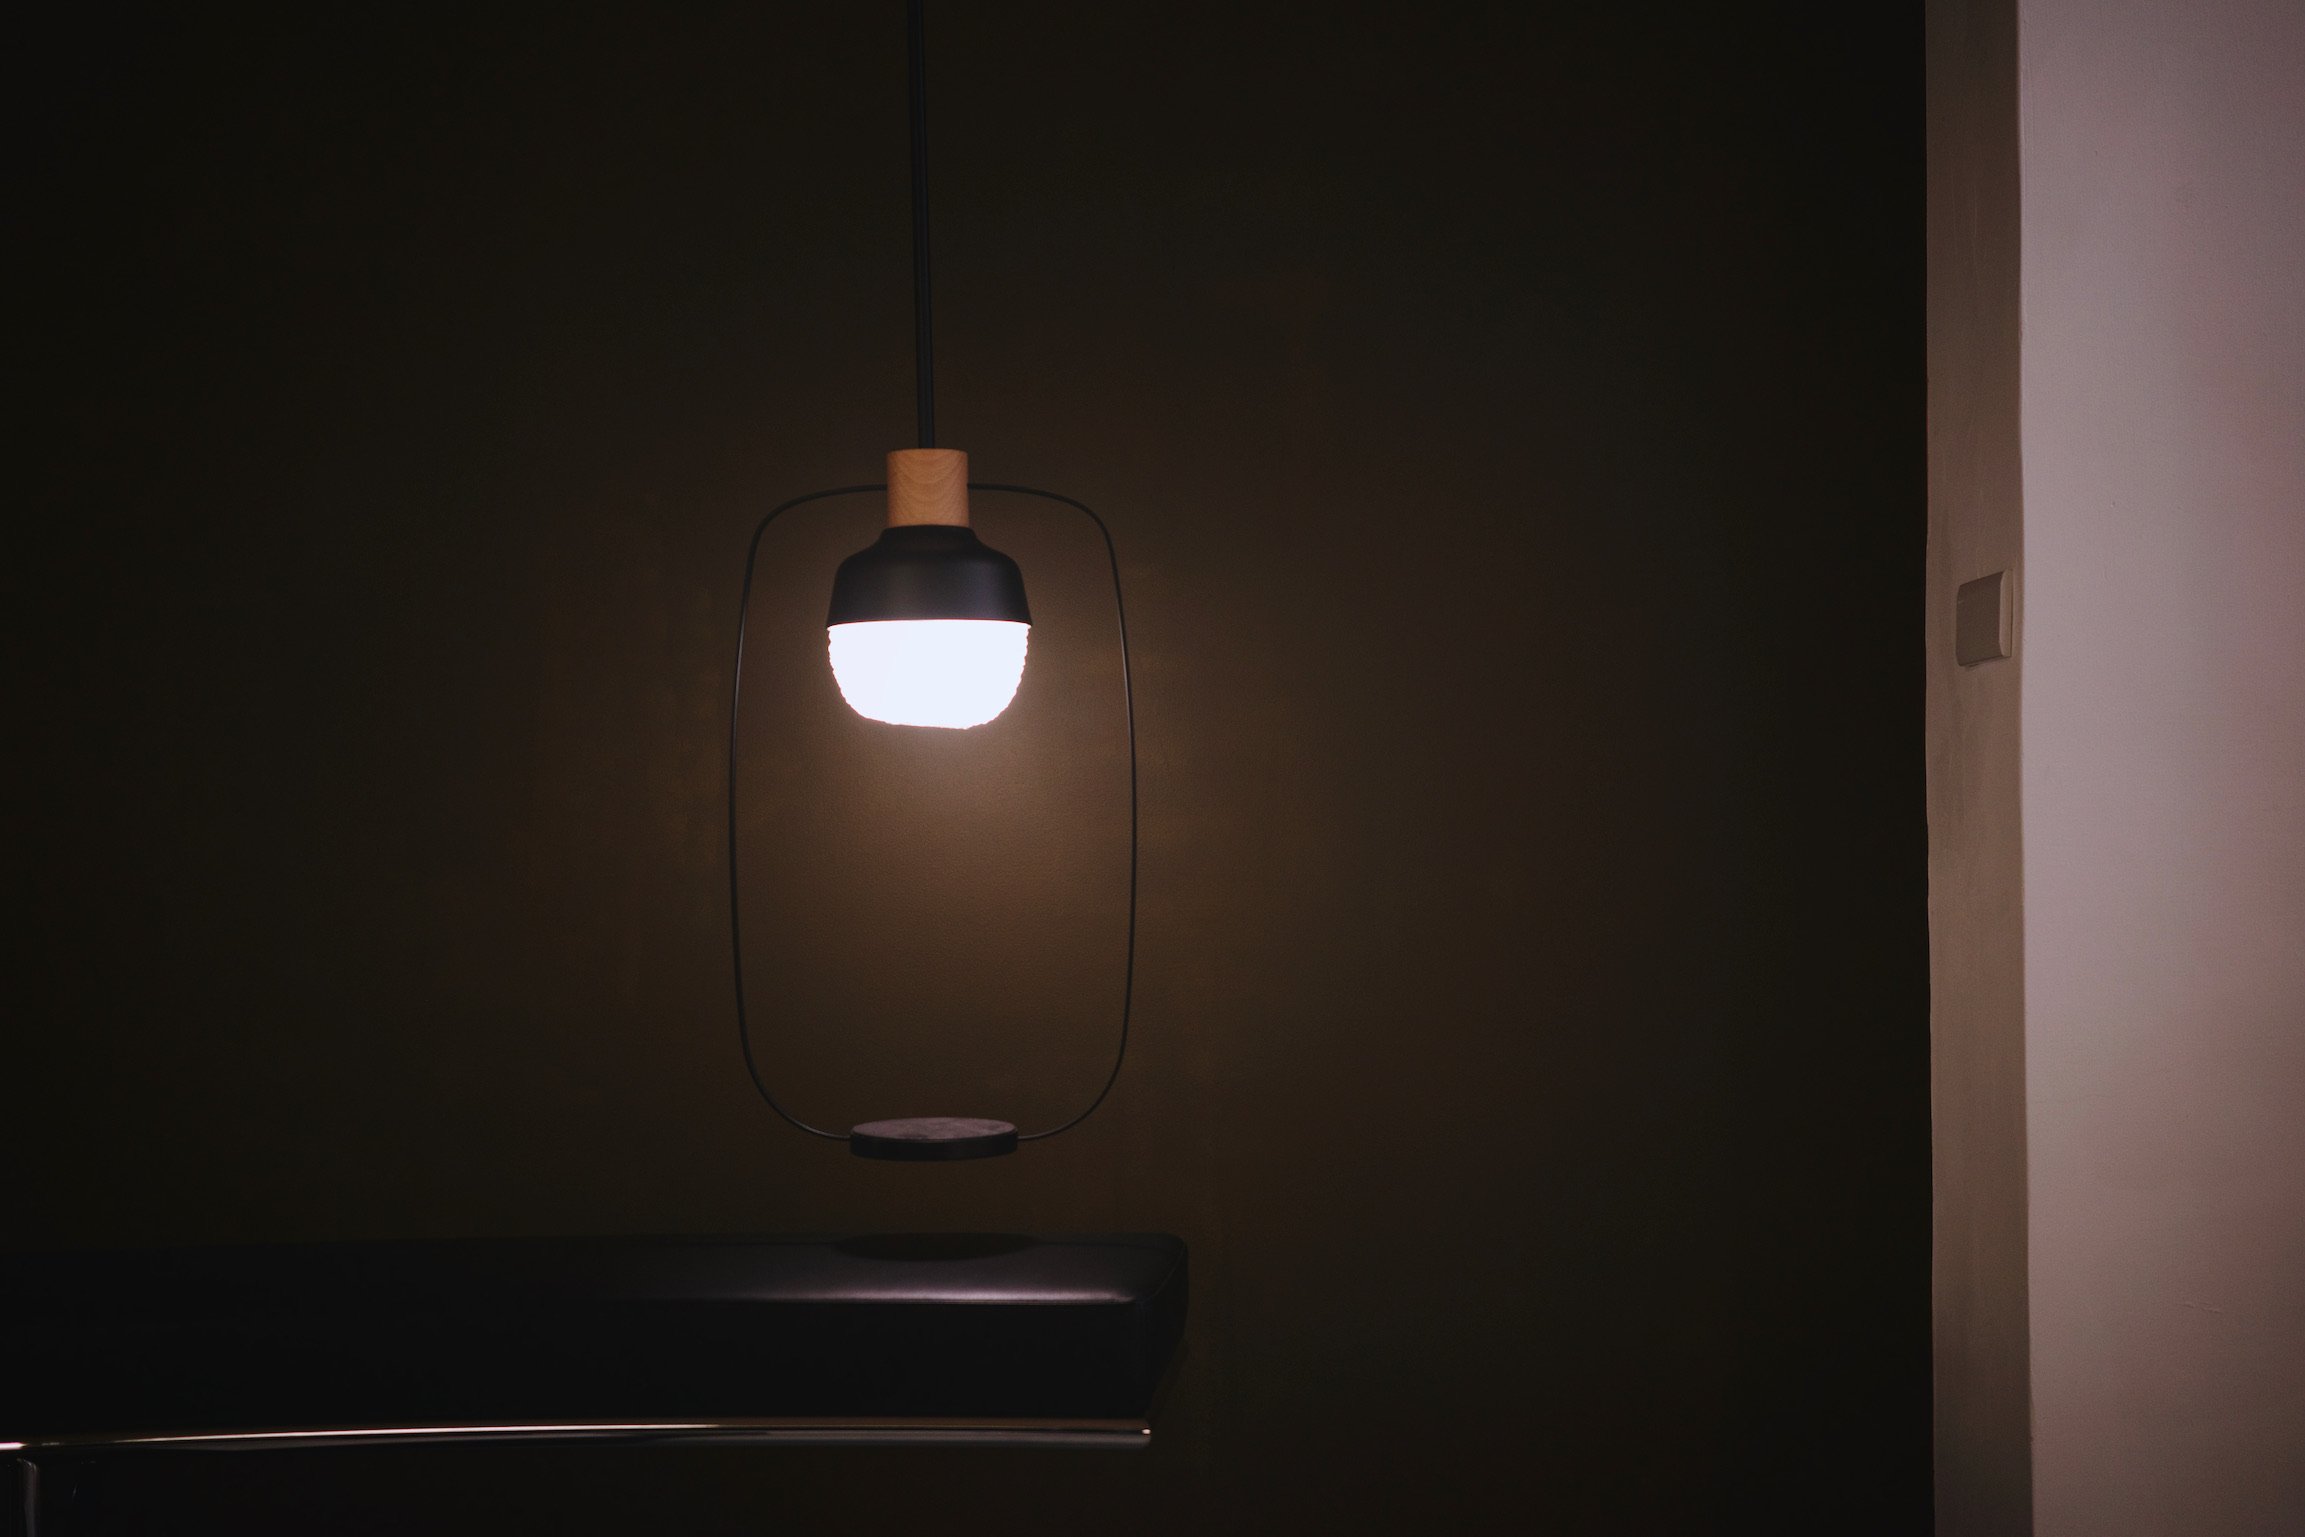 A lamp designed by KIMU Design in a dimly lit room floating above a leather couch.